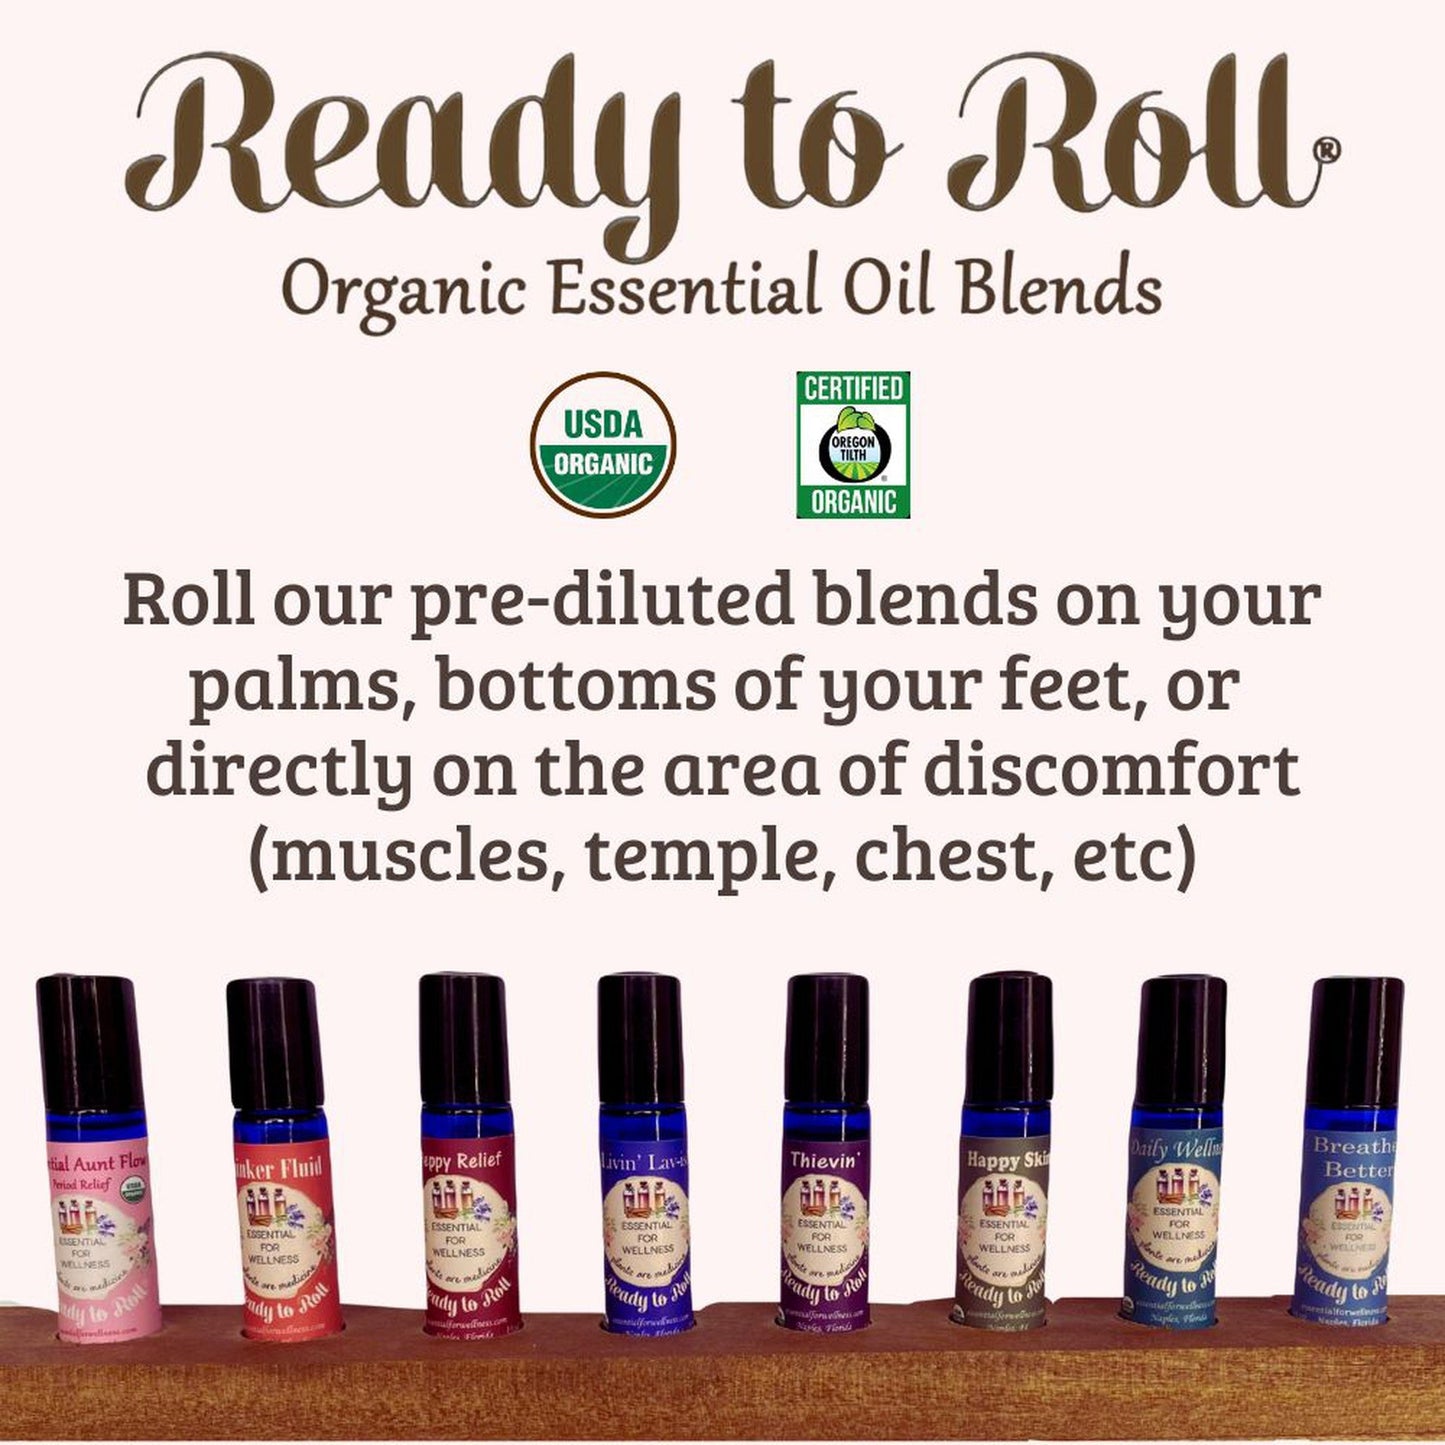 Ready to Roll® Thievin' (Thieves) Organic Essential Oil Blend